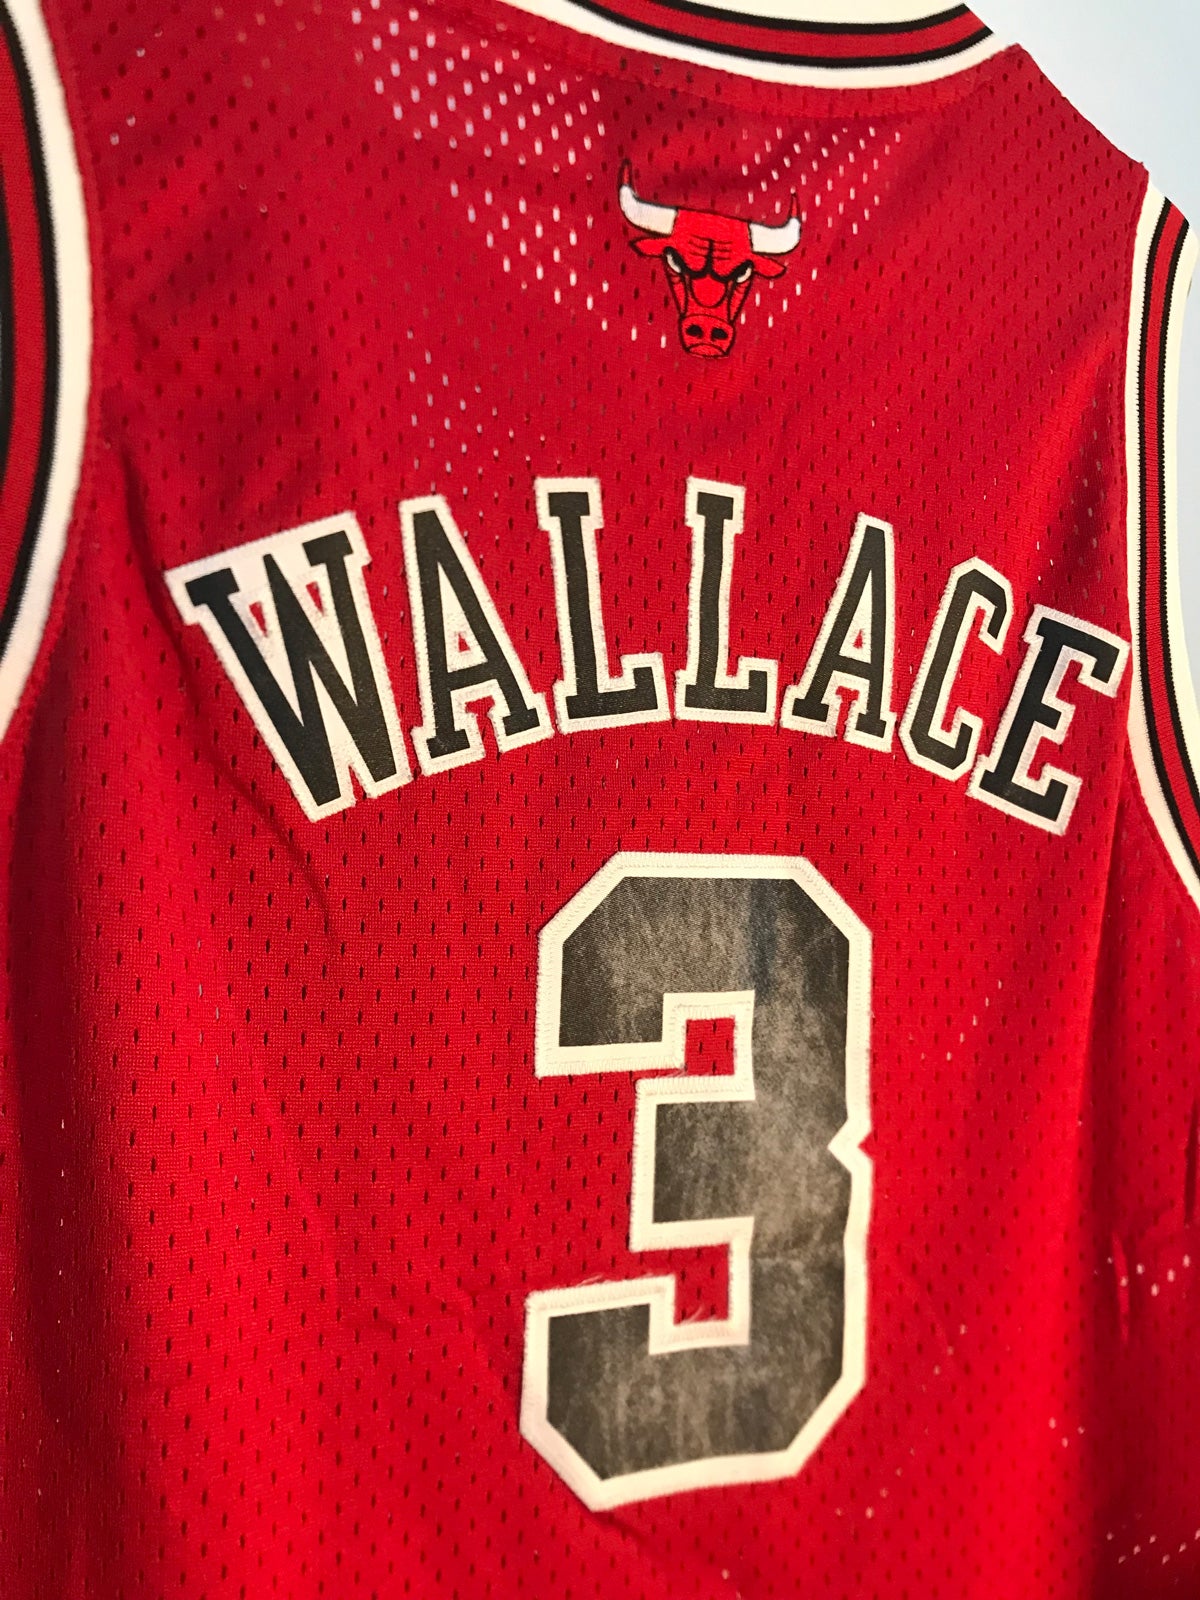 Chicago Bulls Ben Wallace #3 Youth XL Jersey